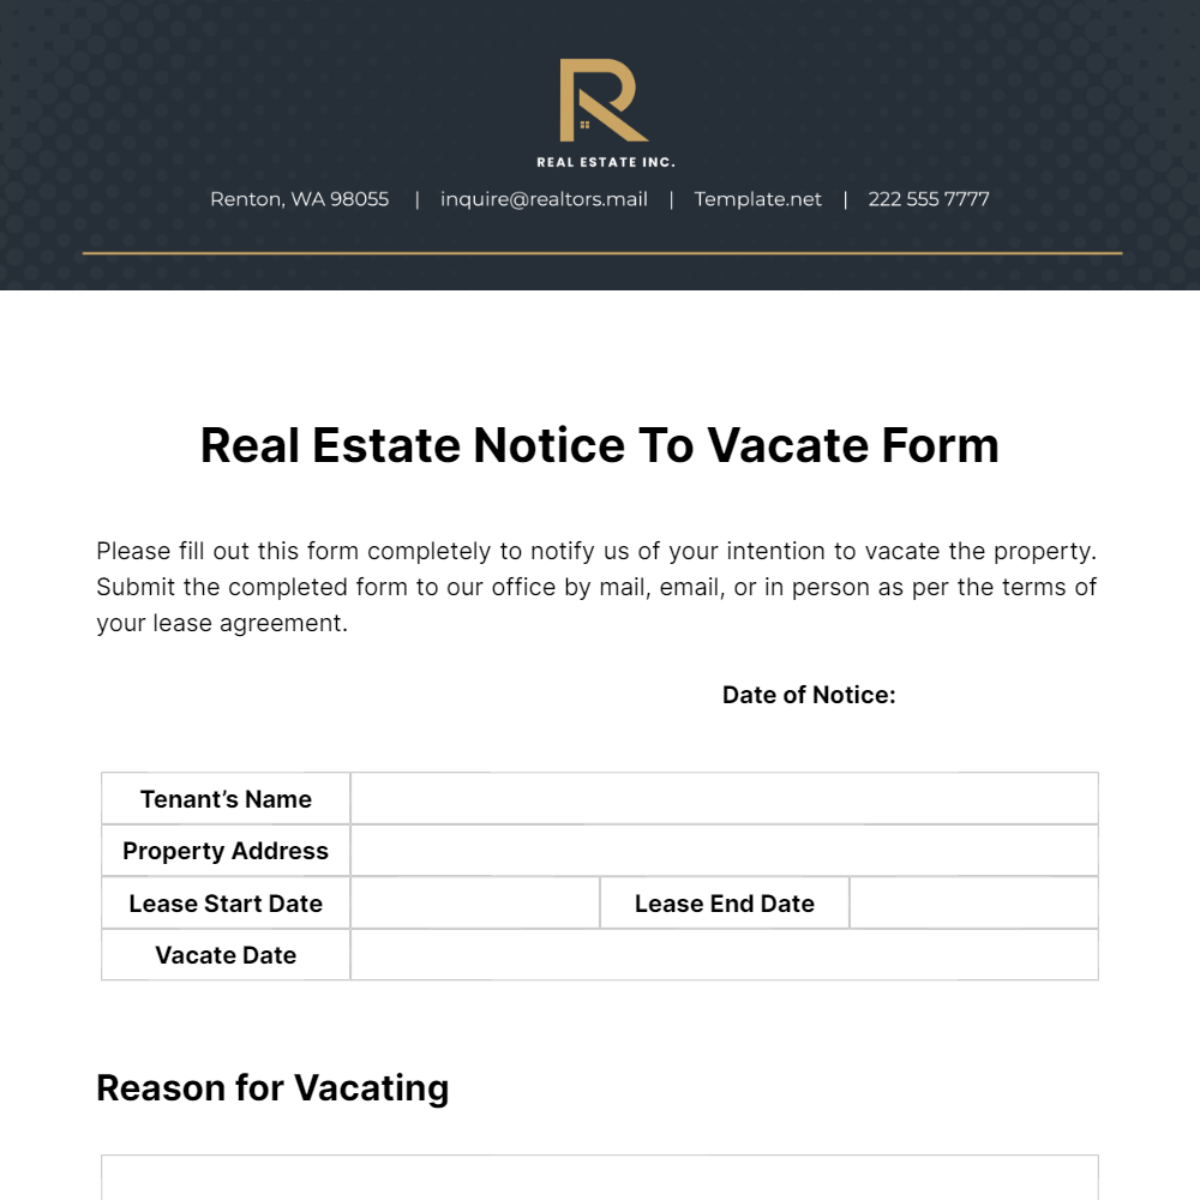 Real Estate Notice To Vacate Form Template